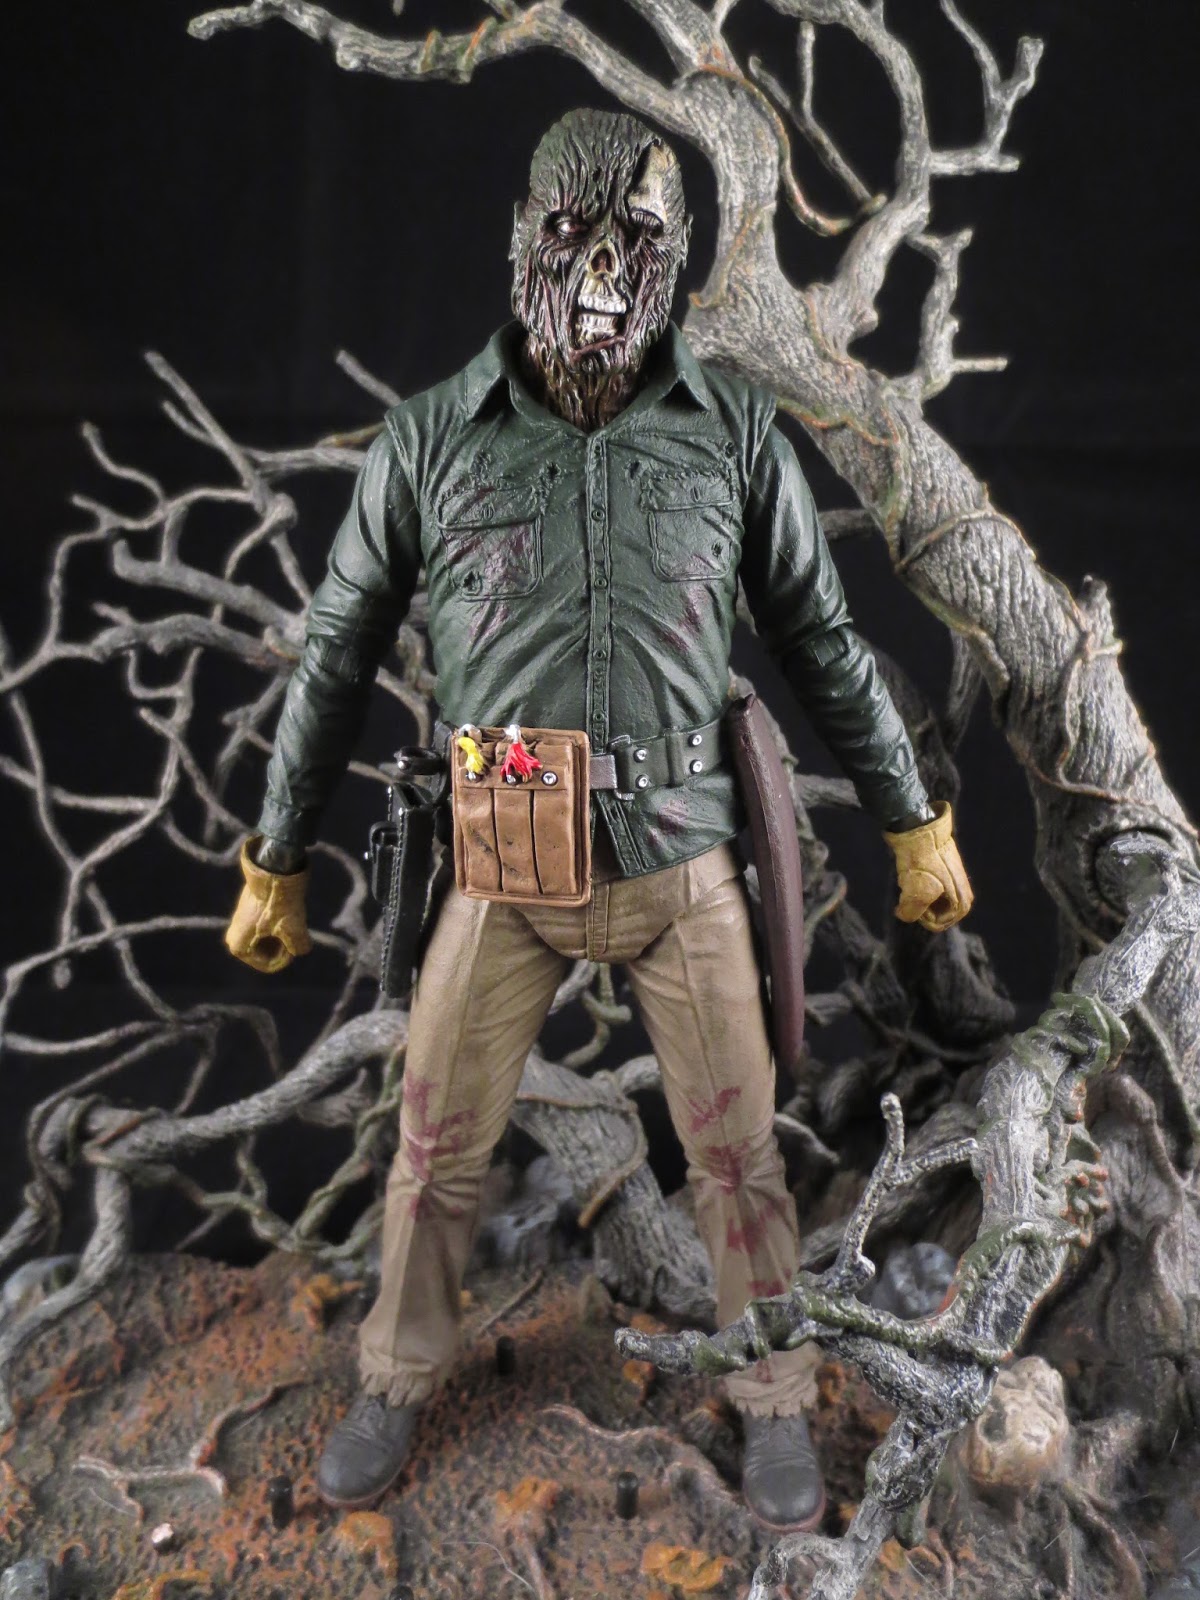 Friday 13th Part 6 Ultimate Jason Voorhees 7" Figure NECA RE-ISSUE Horror 